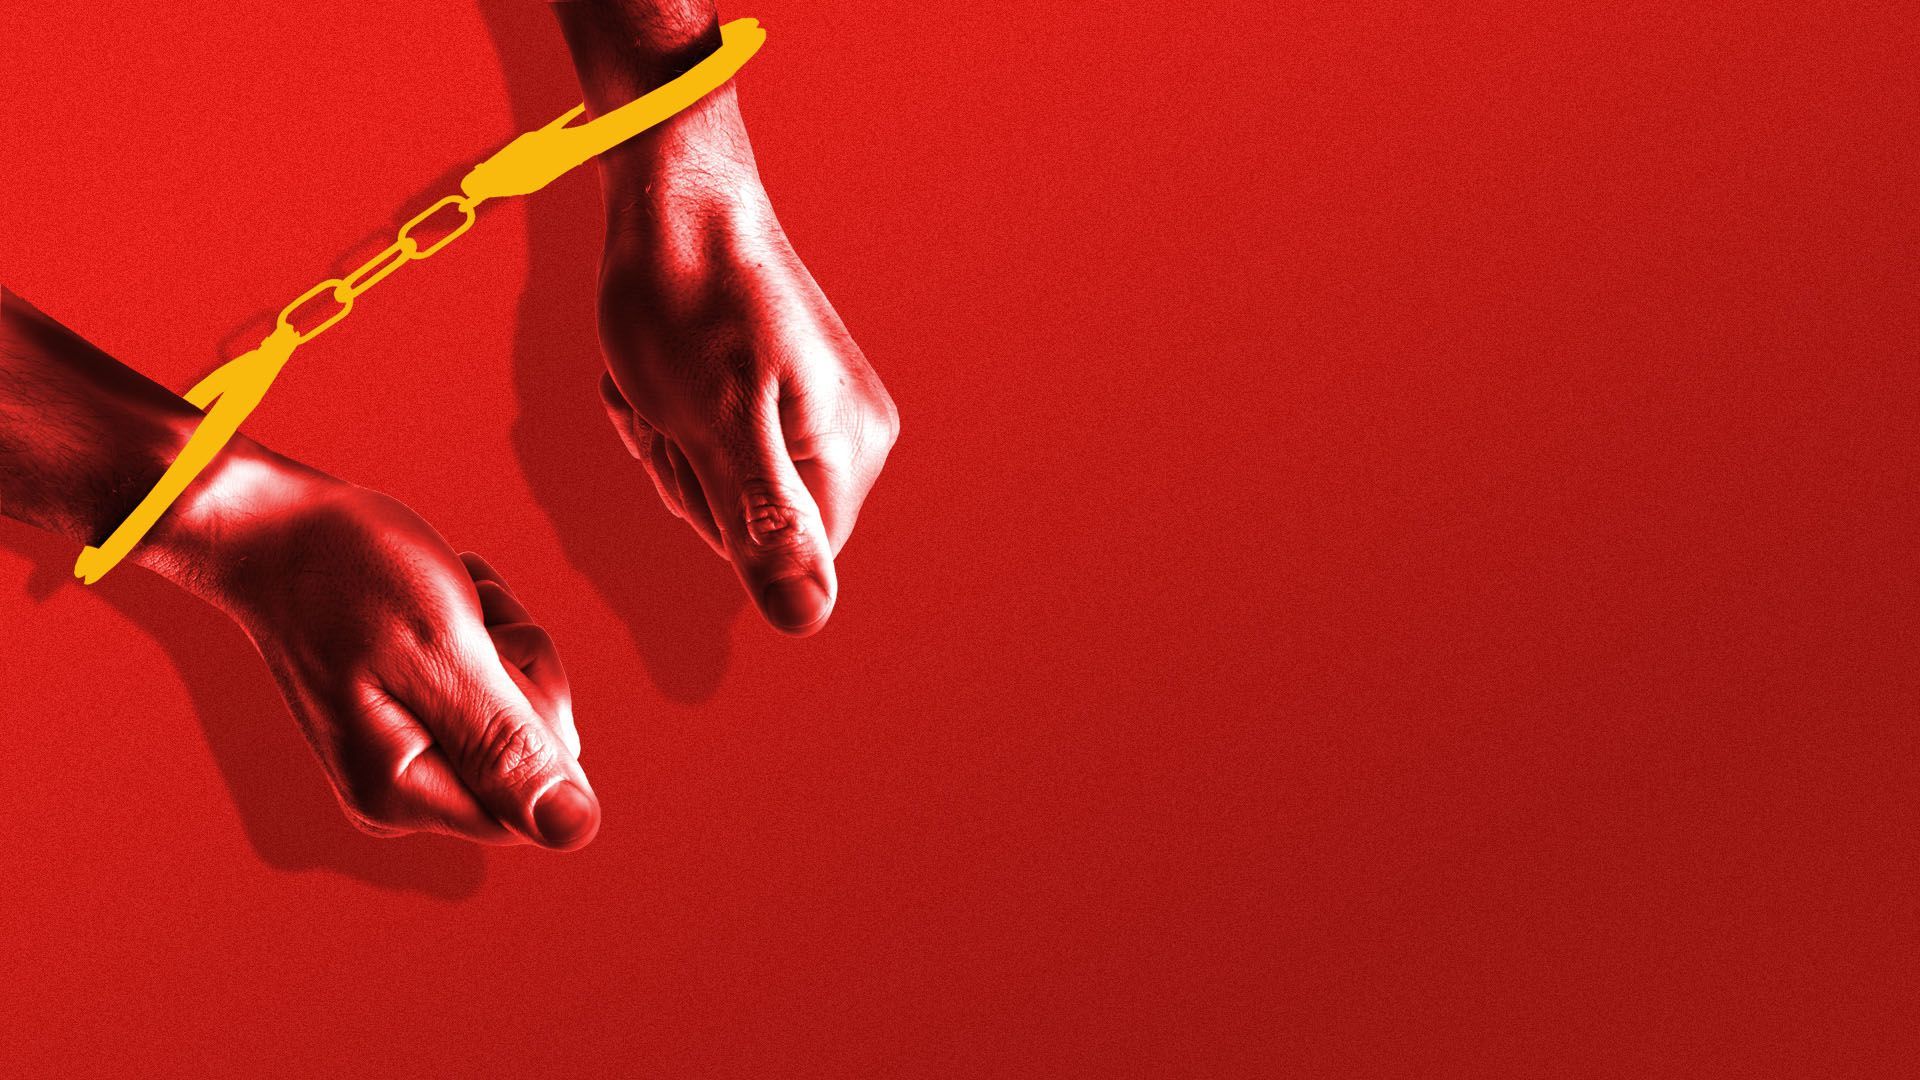 Illustration of a pair of hands in yellow handcuffs over a red background reminiscent of the flag of China